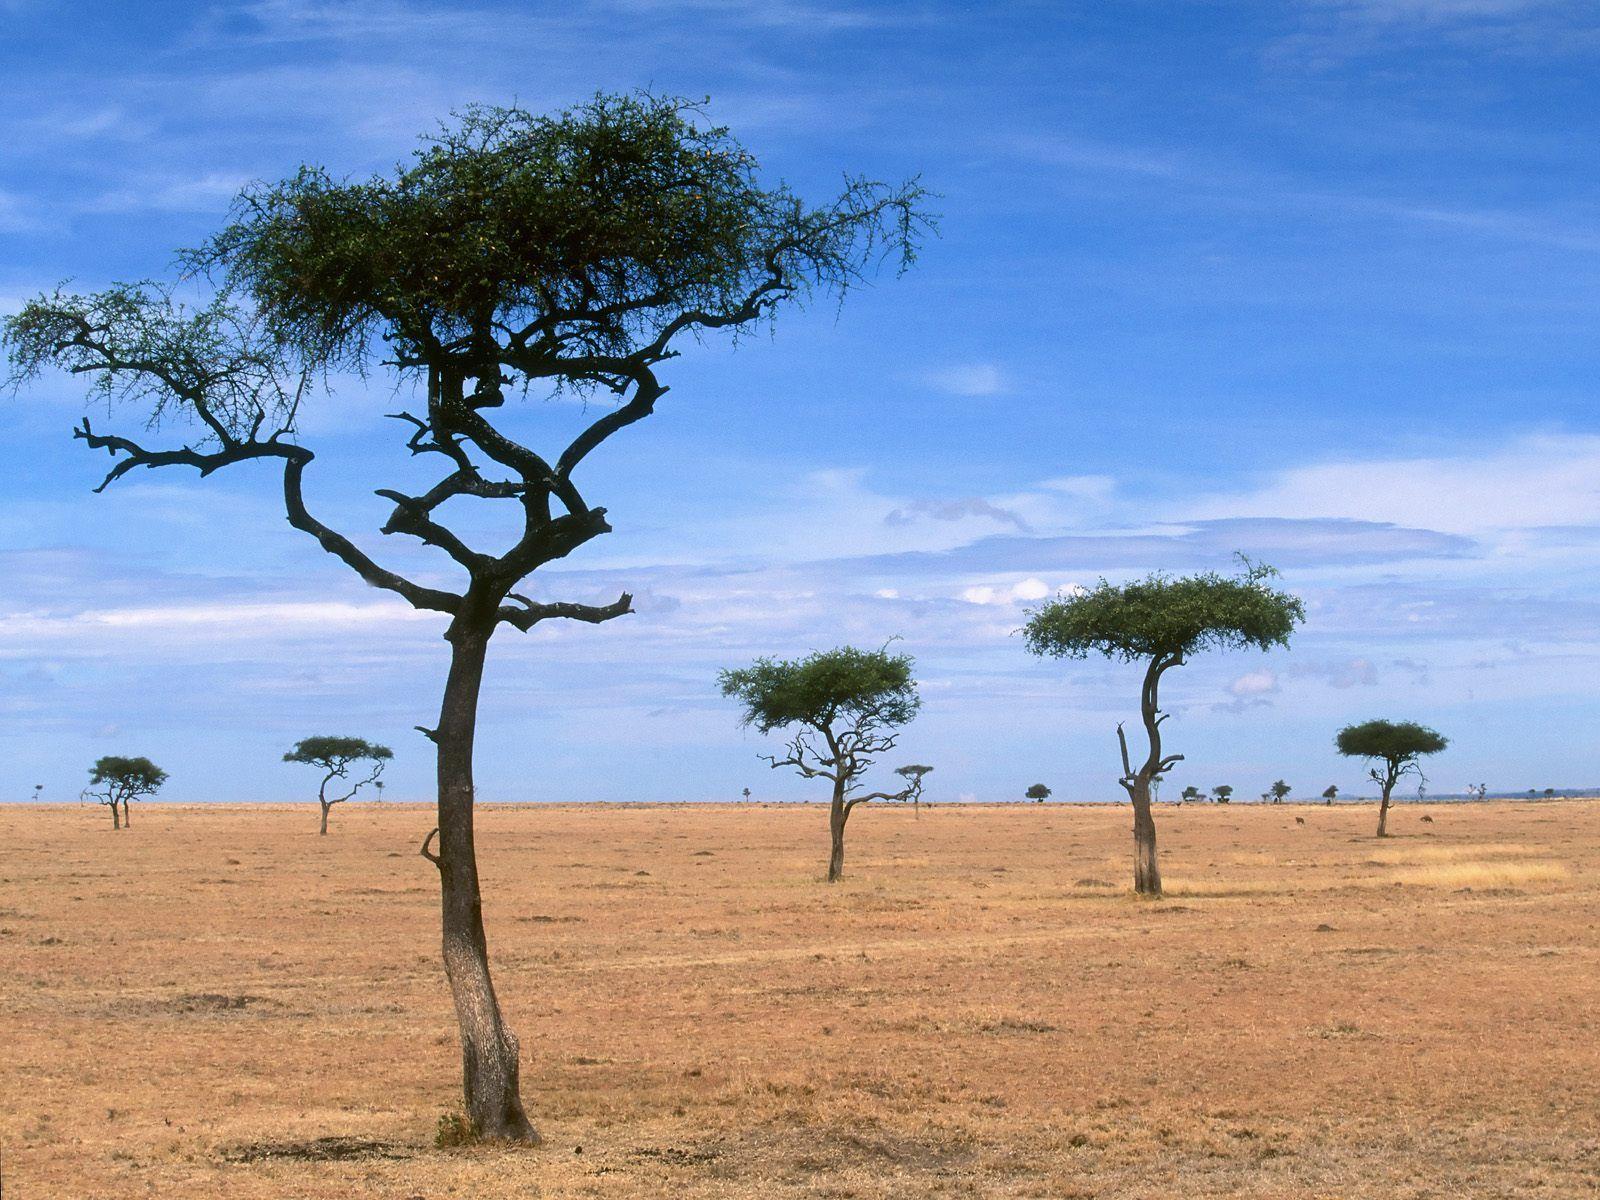 Scattered Acacia Trees / Kenya / Africa wallpapers and image